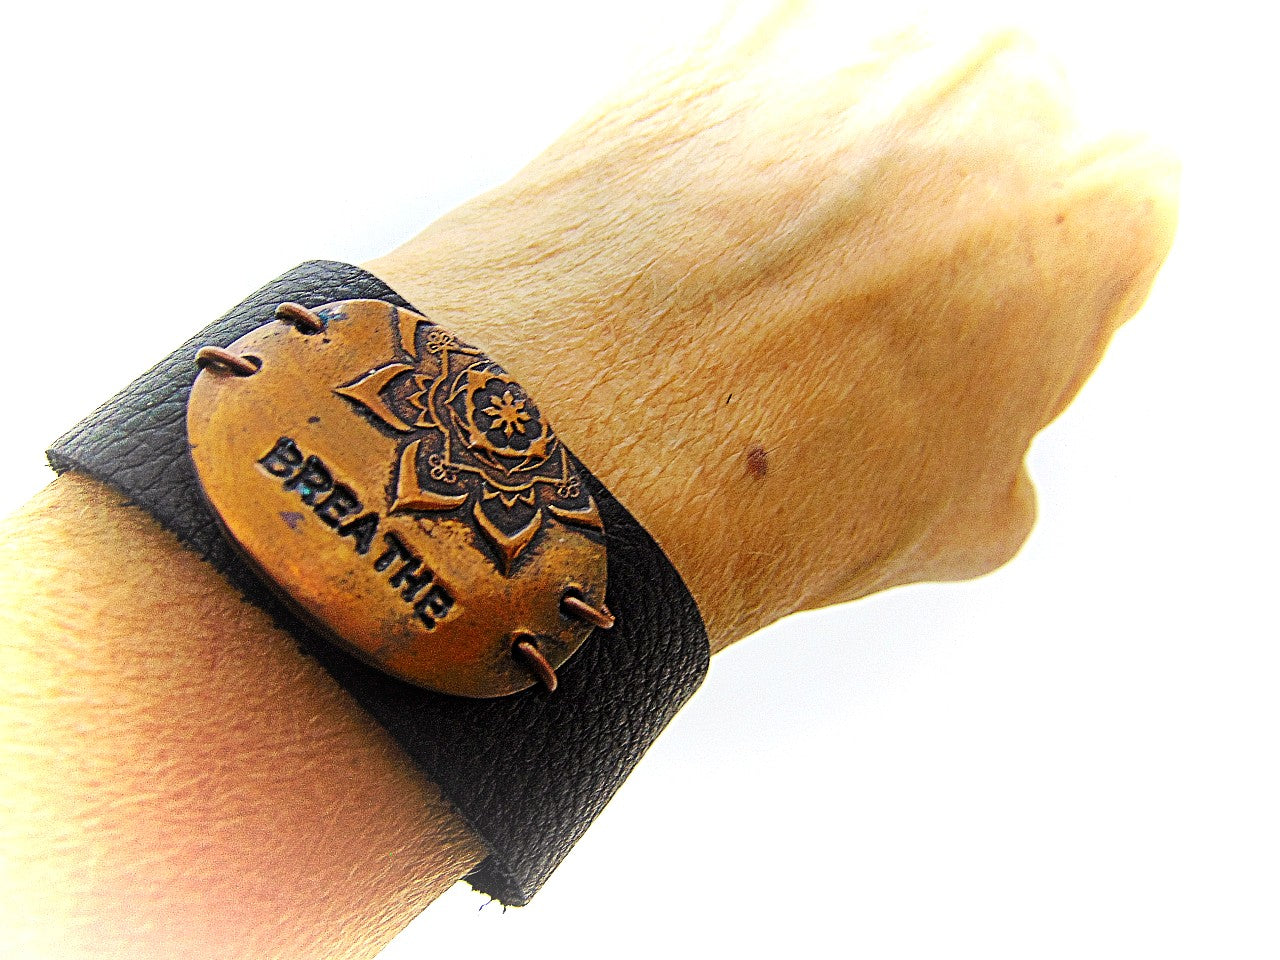 Handcrafted inspirational Yoga black deer leather bracelet with solid copper mandala tag with the word “breathe”. Motivational messages and words inspire positive energy in your life.  I put my heart and soul into every piece I create, which results in high quality workmanship and all my jewelry items are carefully handcrafted.